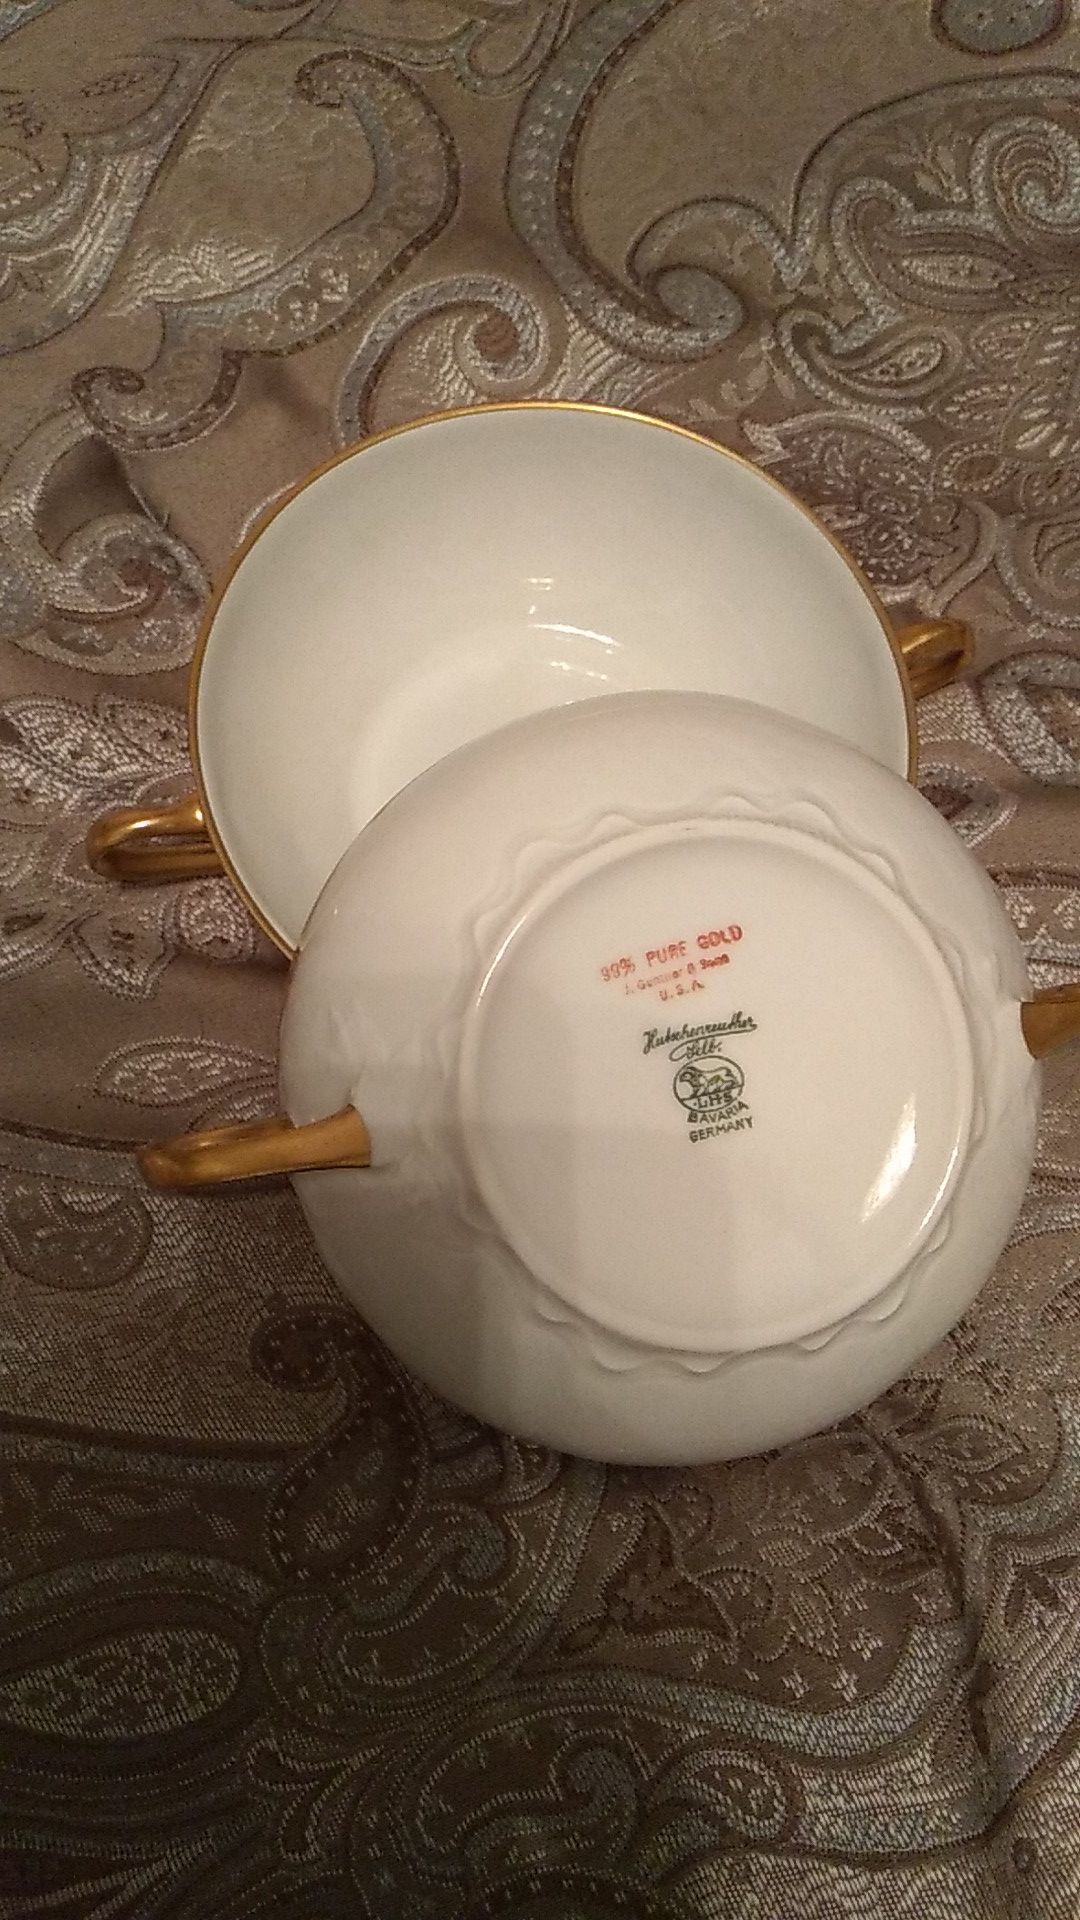 Antique Bavarian China Bowls From Germany